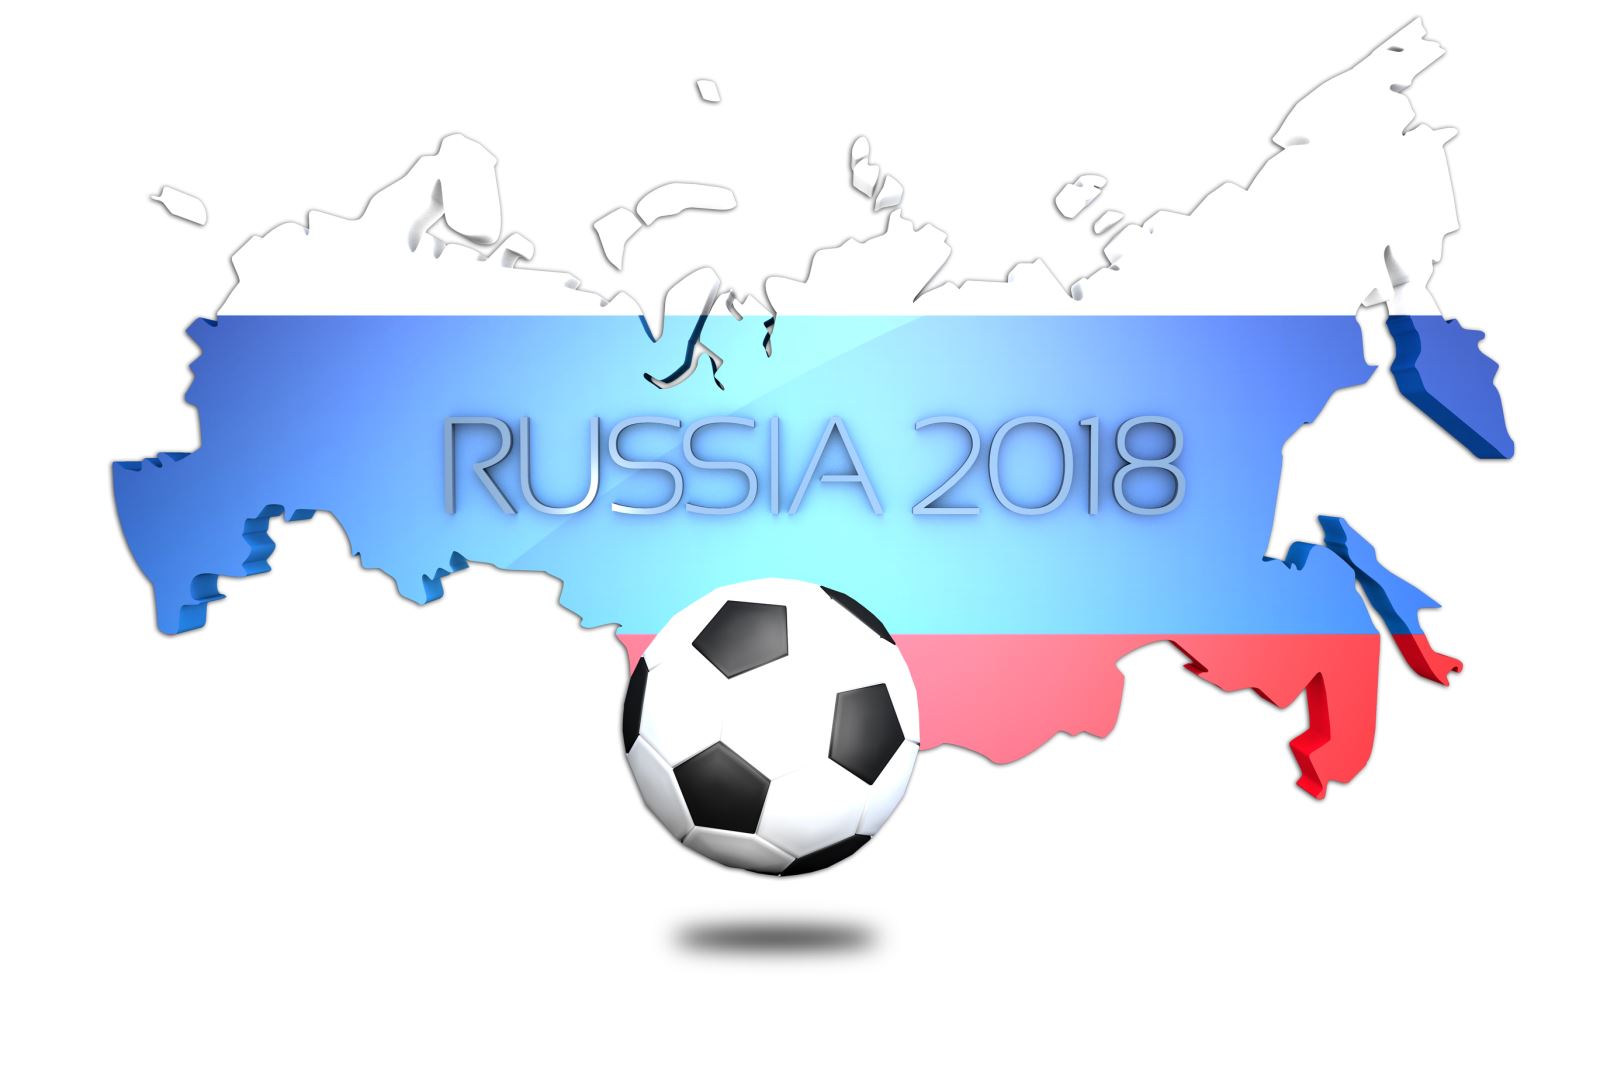 This year's World Cup is being held in locations across Russia